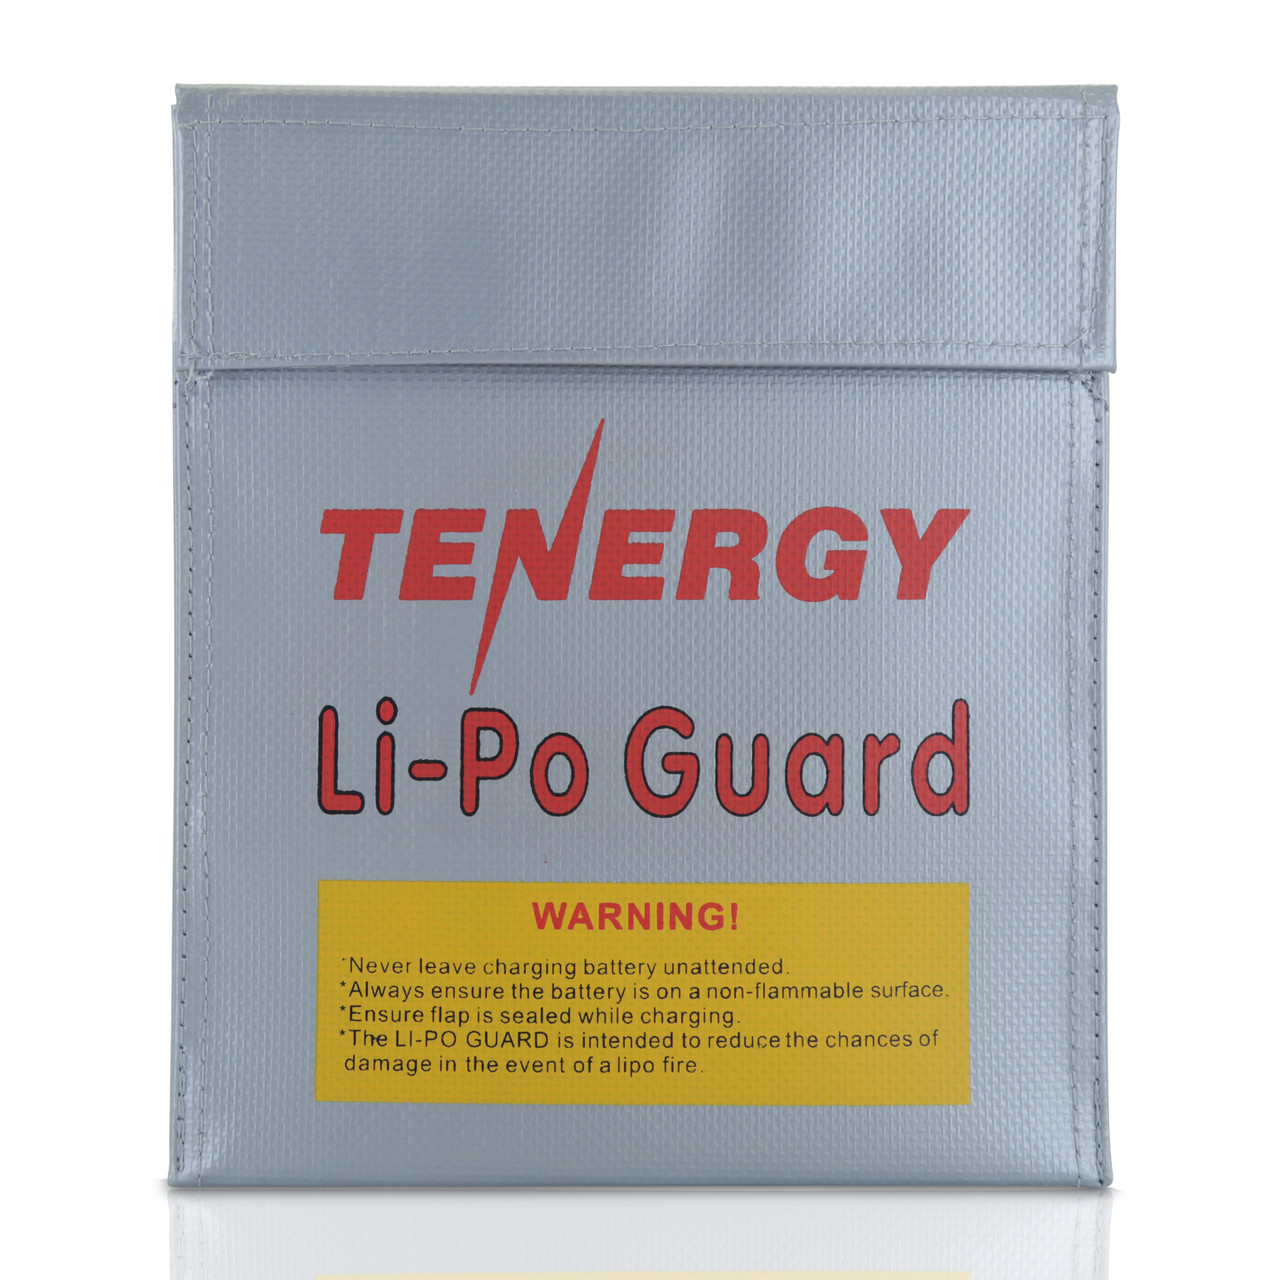 Tenergy Lipo Bag, Fire Retardant Lipo Battery Bag for Charging and Storage, 7x9inches